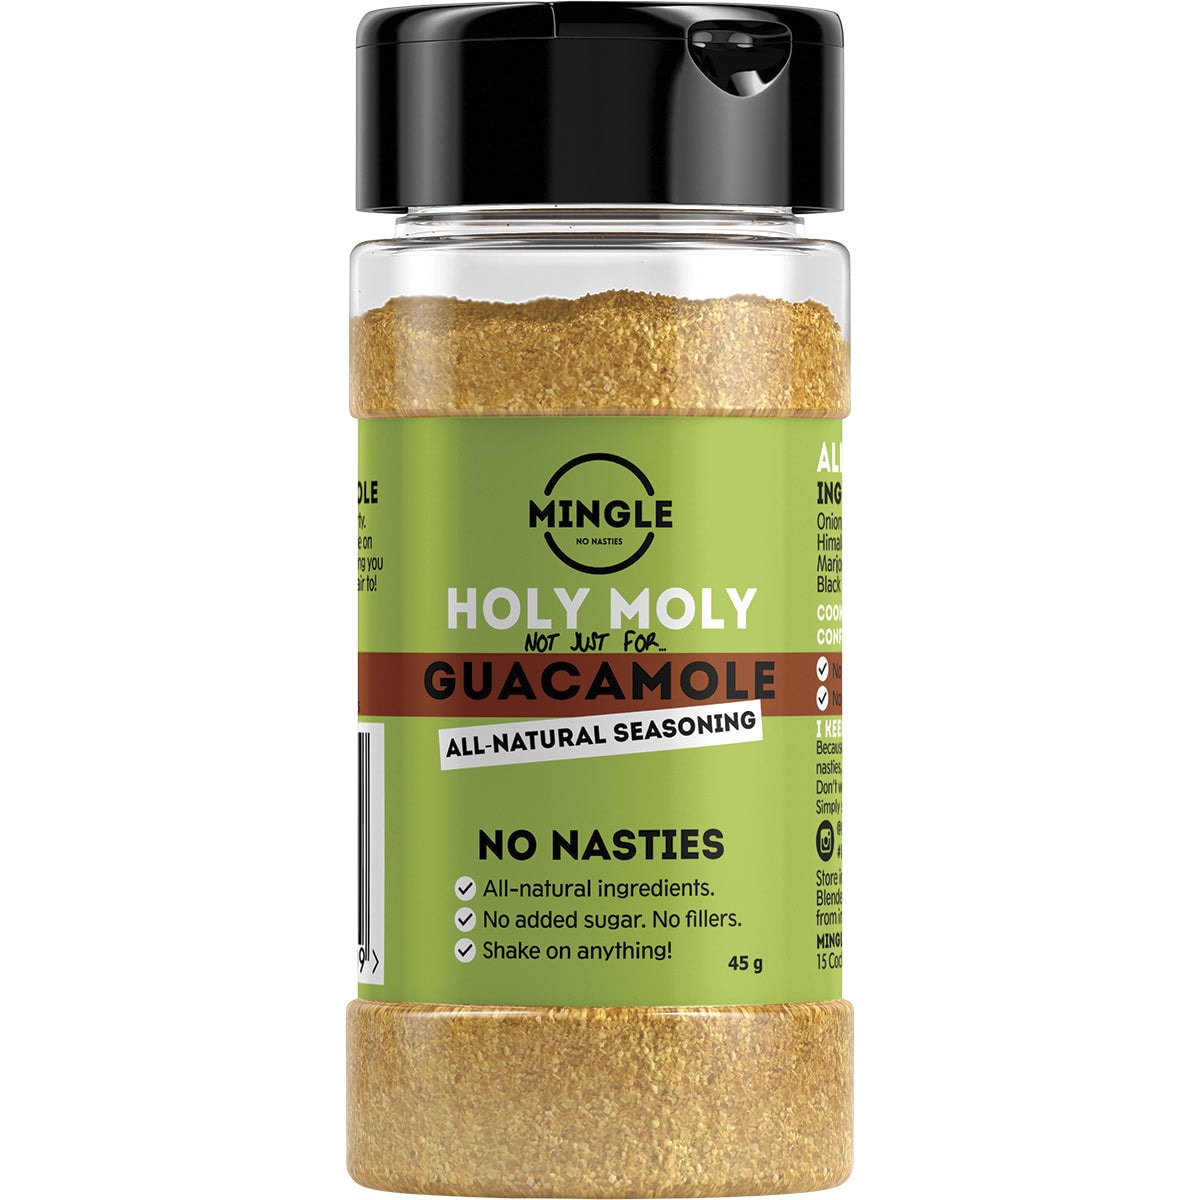 Mingle Seasoning Holy Moly Not Just For Guacamole 45g